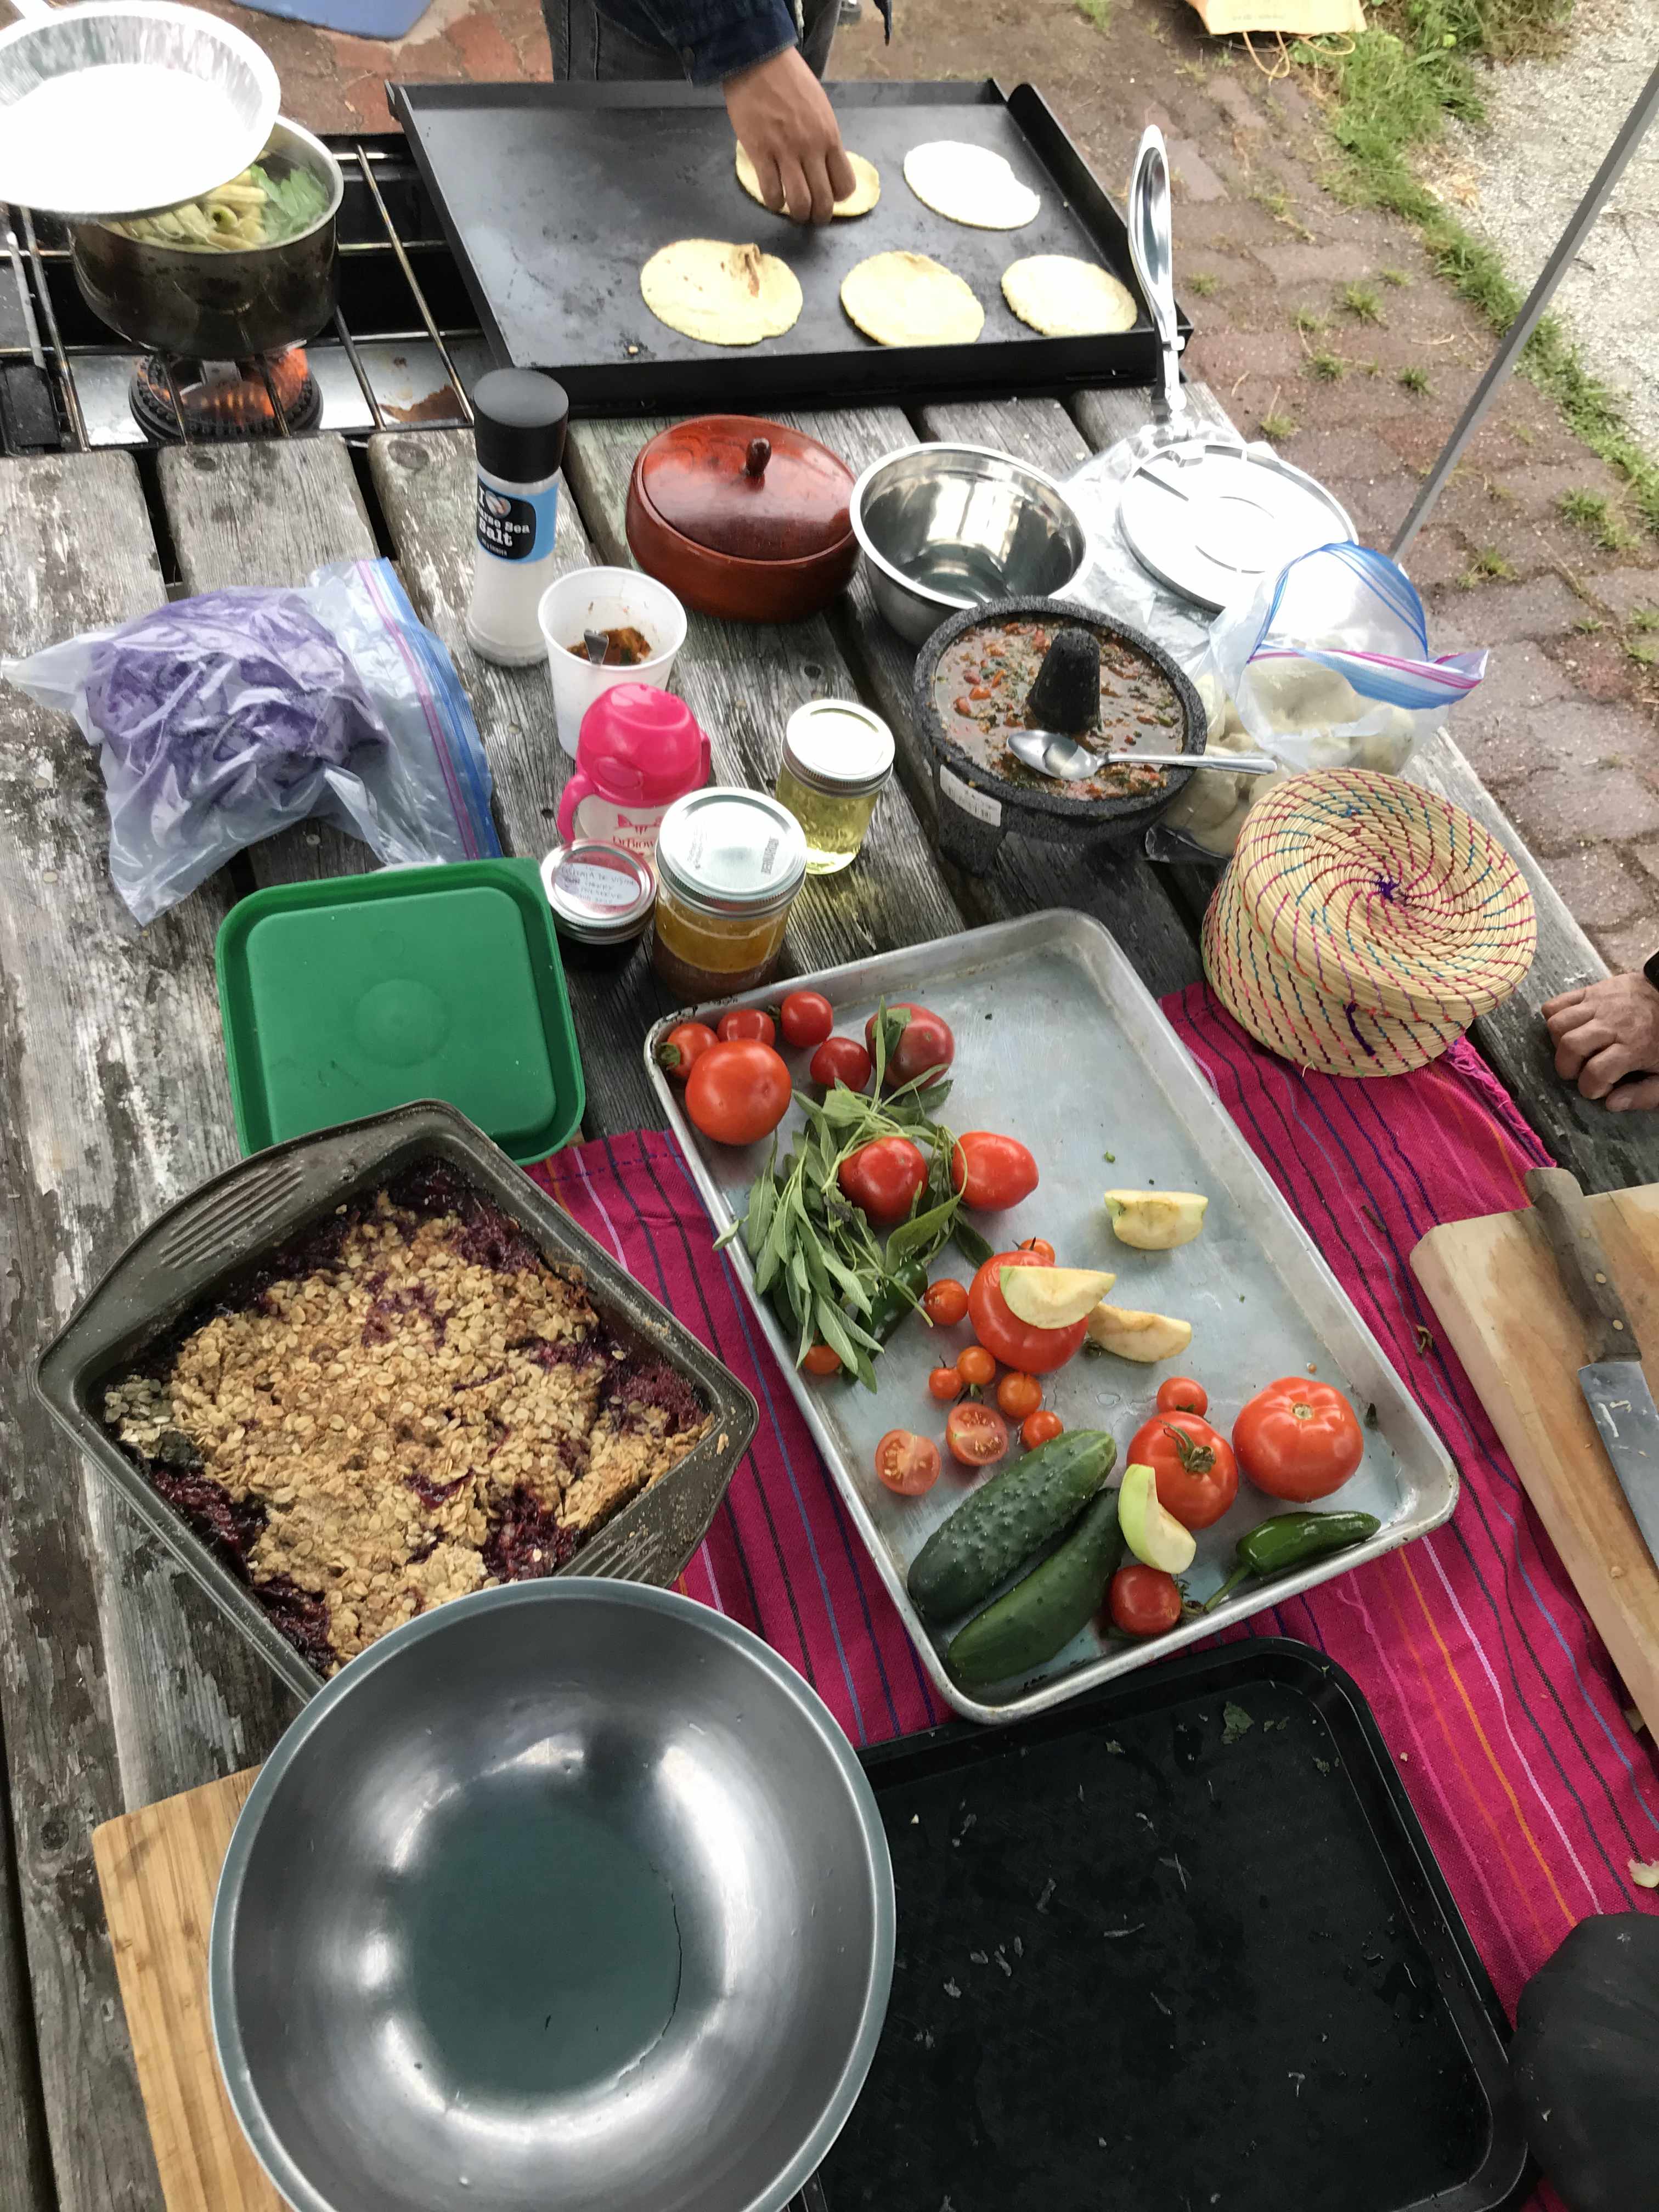 A table top covered with tortillas, salsa, squash, salmon and apple tea. someone is preparing fresh tortillas in the corner of the photo